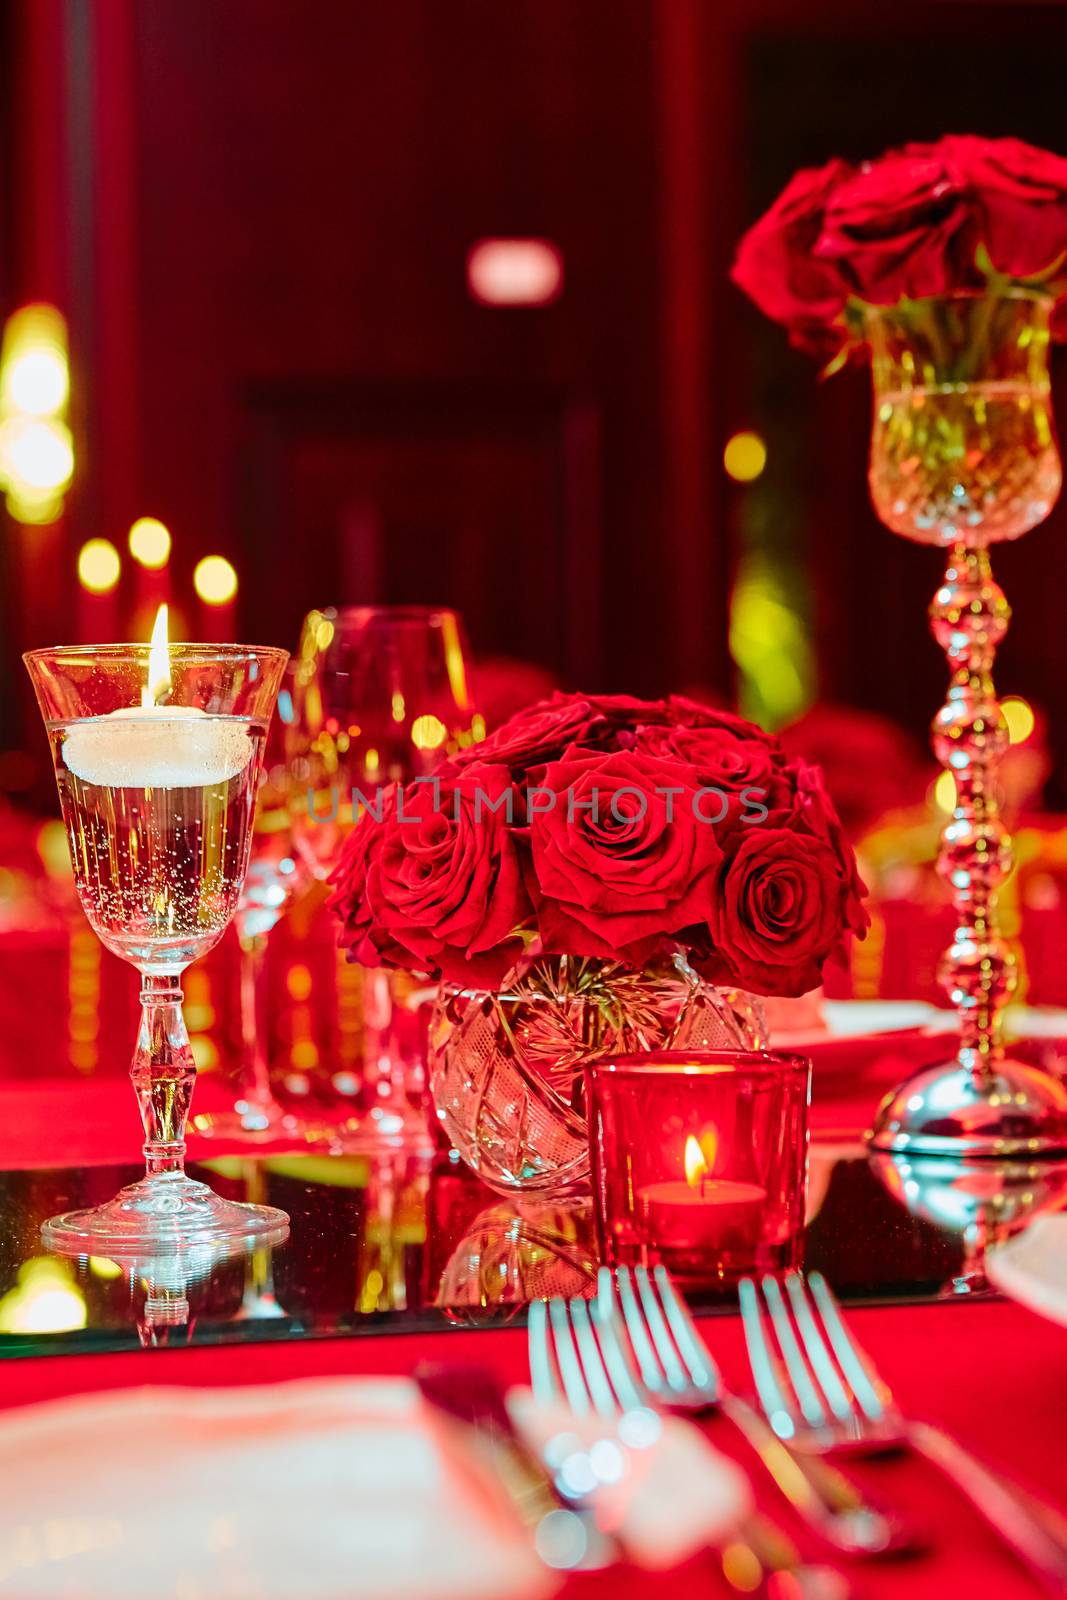 Table set for wedding or another catered event dinner in red colors